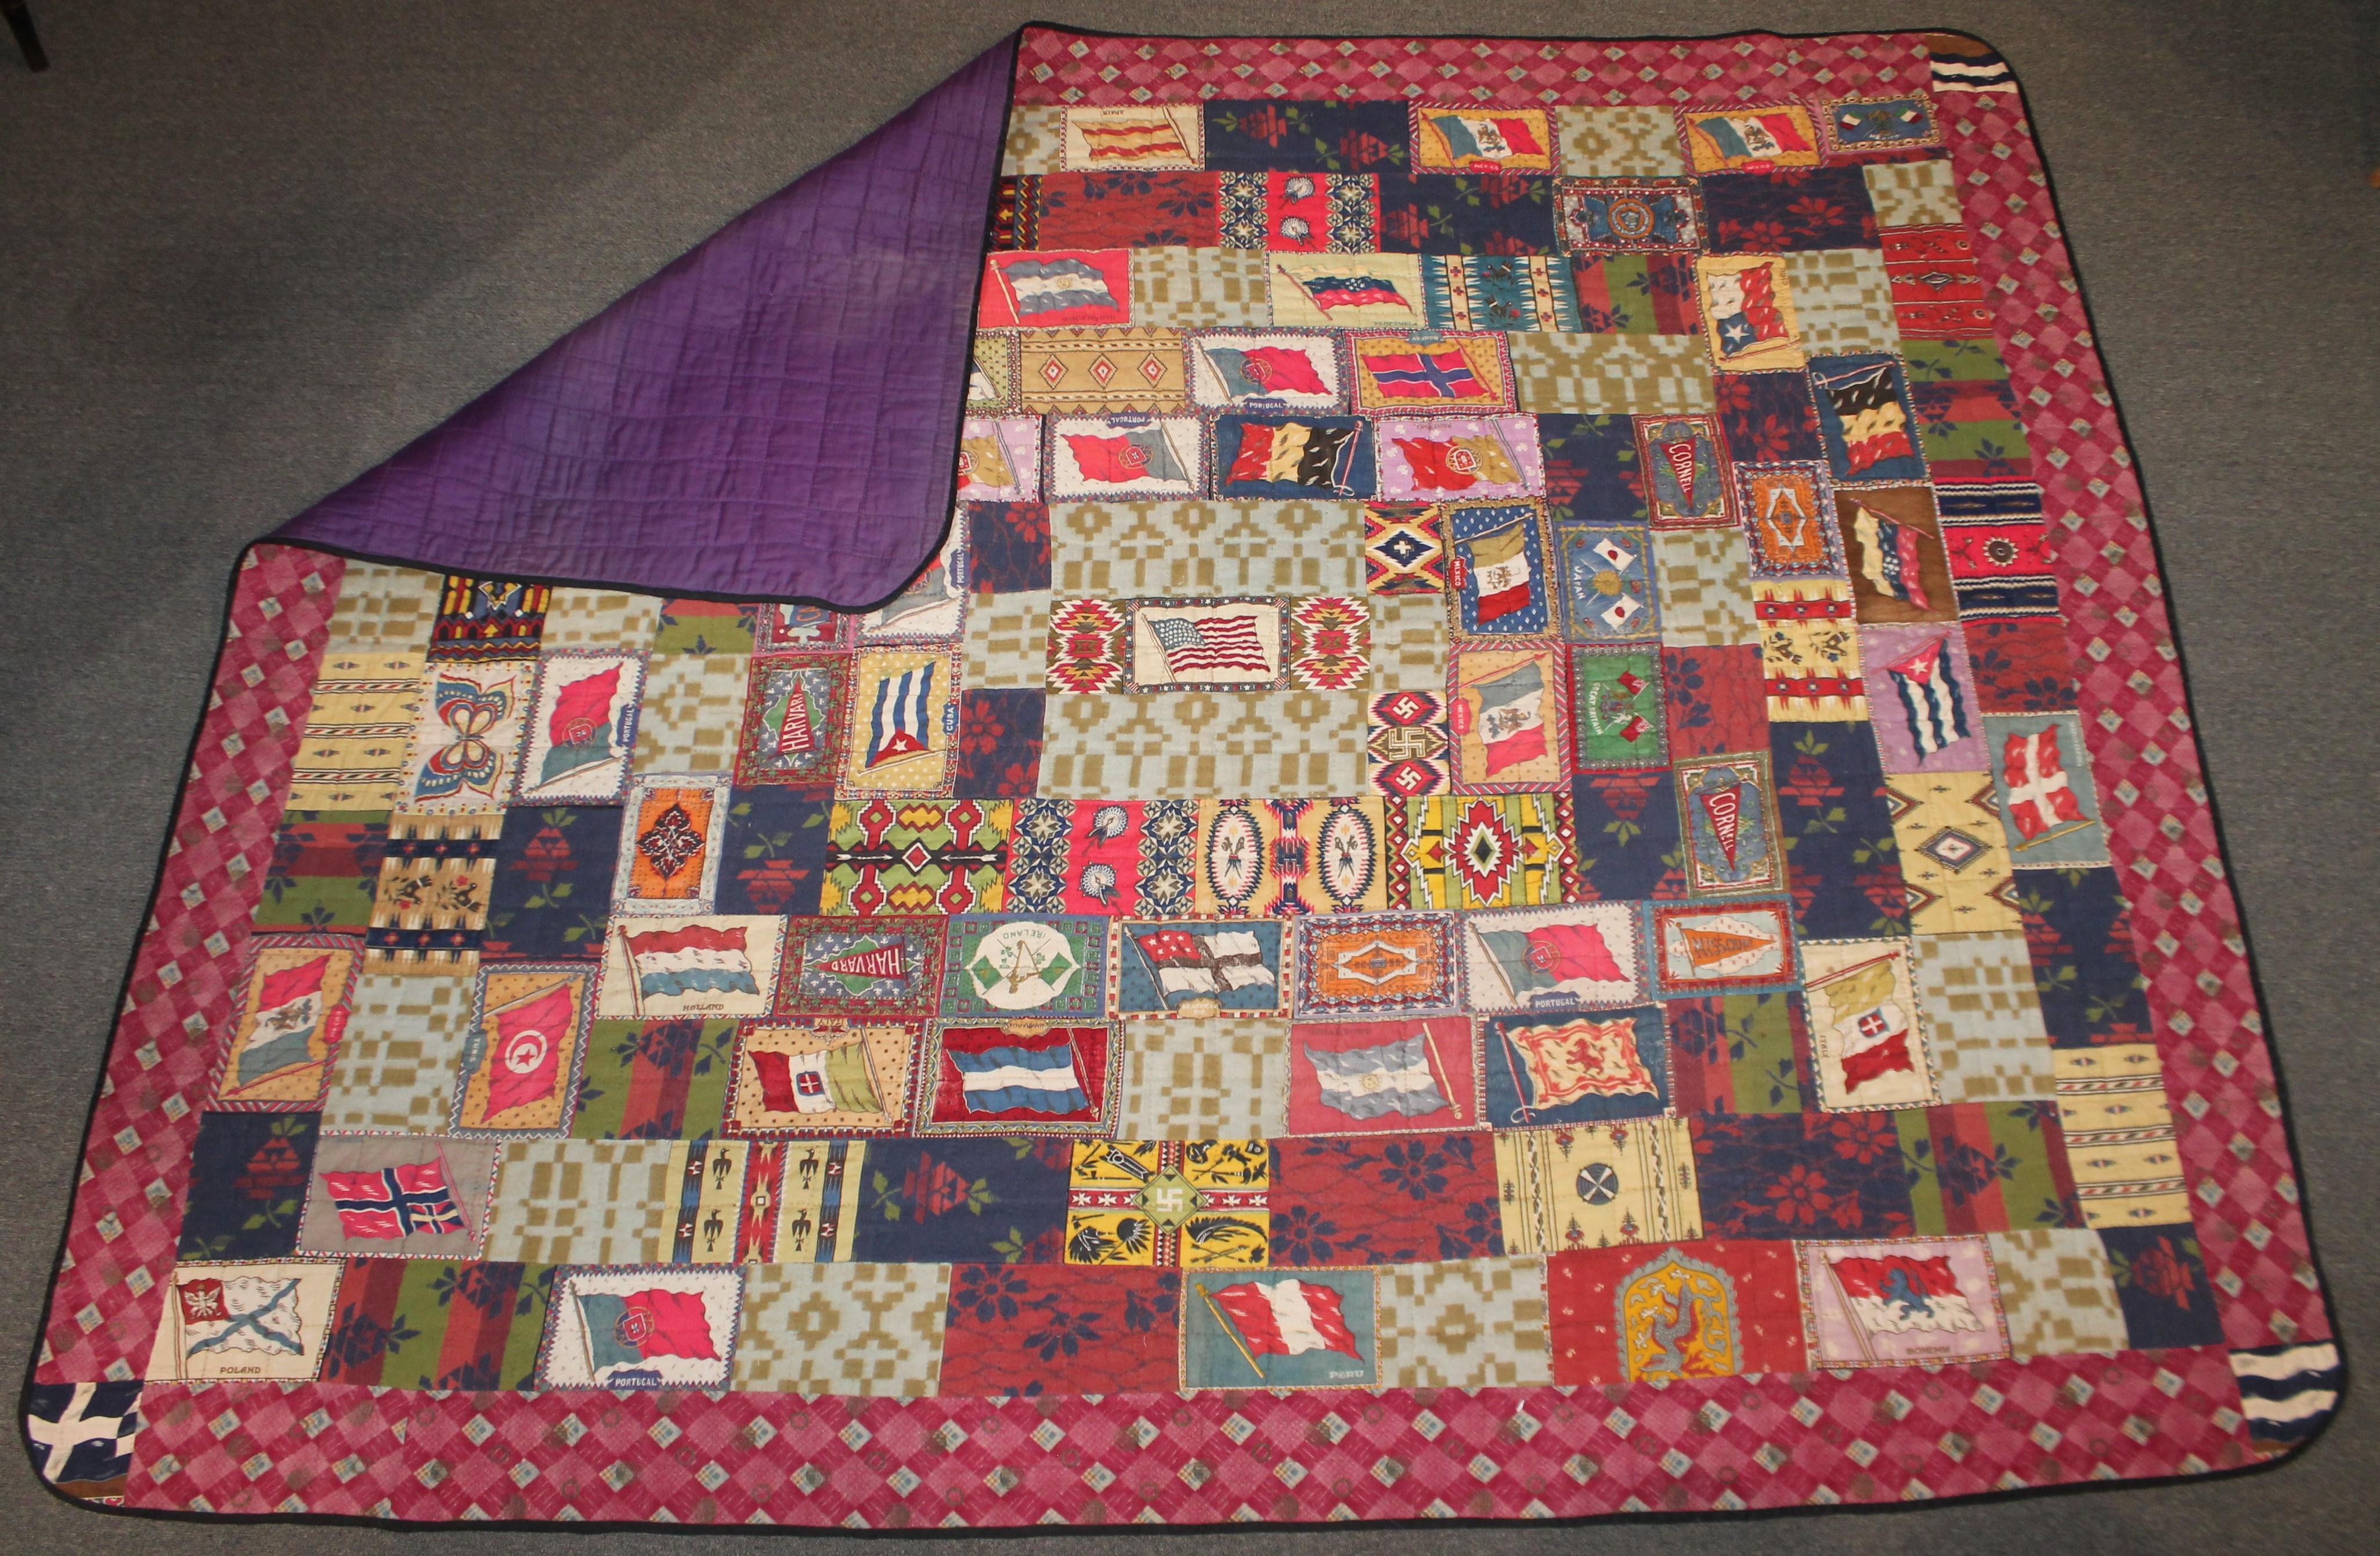 Multi-different country cigar premium quilt with an American flag center patch. The body of this quilt is made up of Beacon Indian blanket patches. The backing is a solid purple cotton sateen fabric.